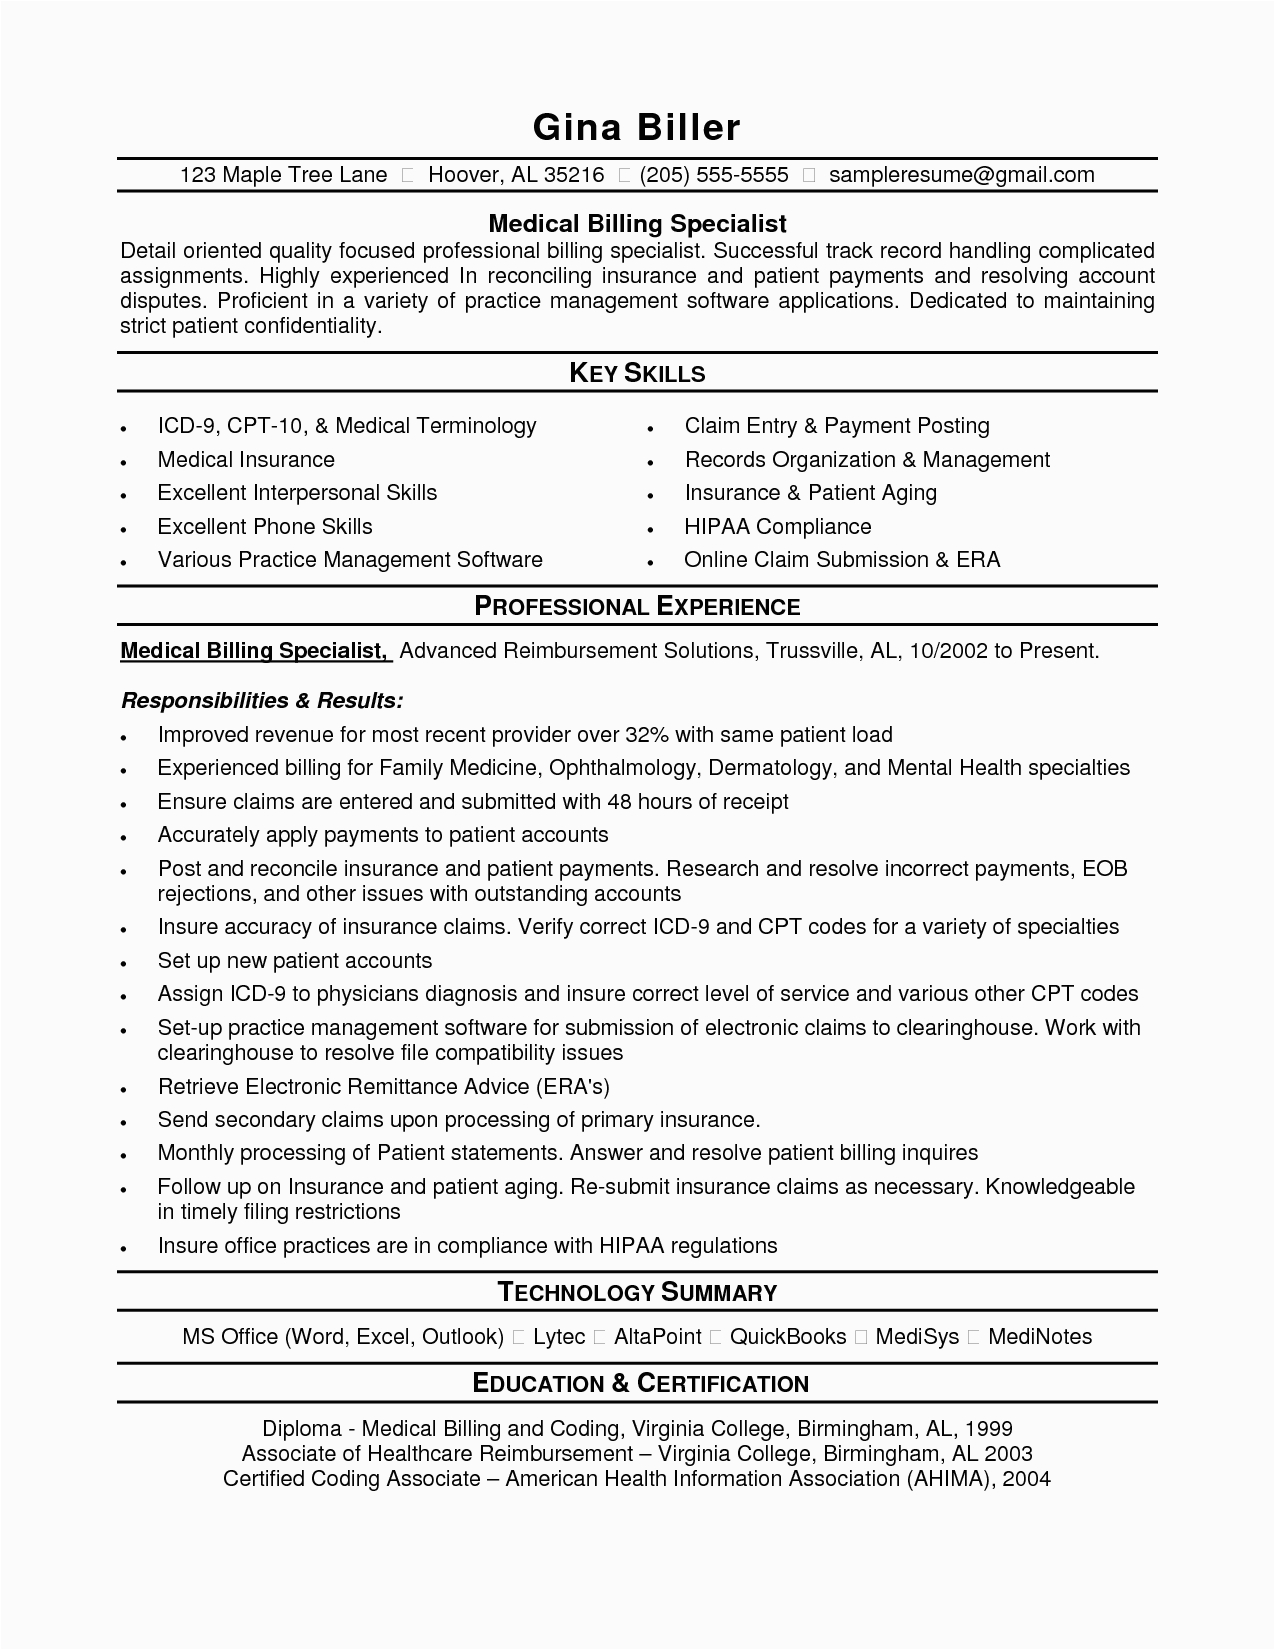 Healthcare Billing and Coding Resume Samples Resume Templates for Medical Billing and Coding Resmud